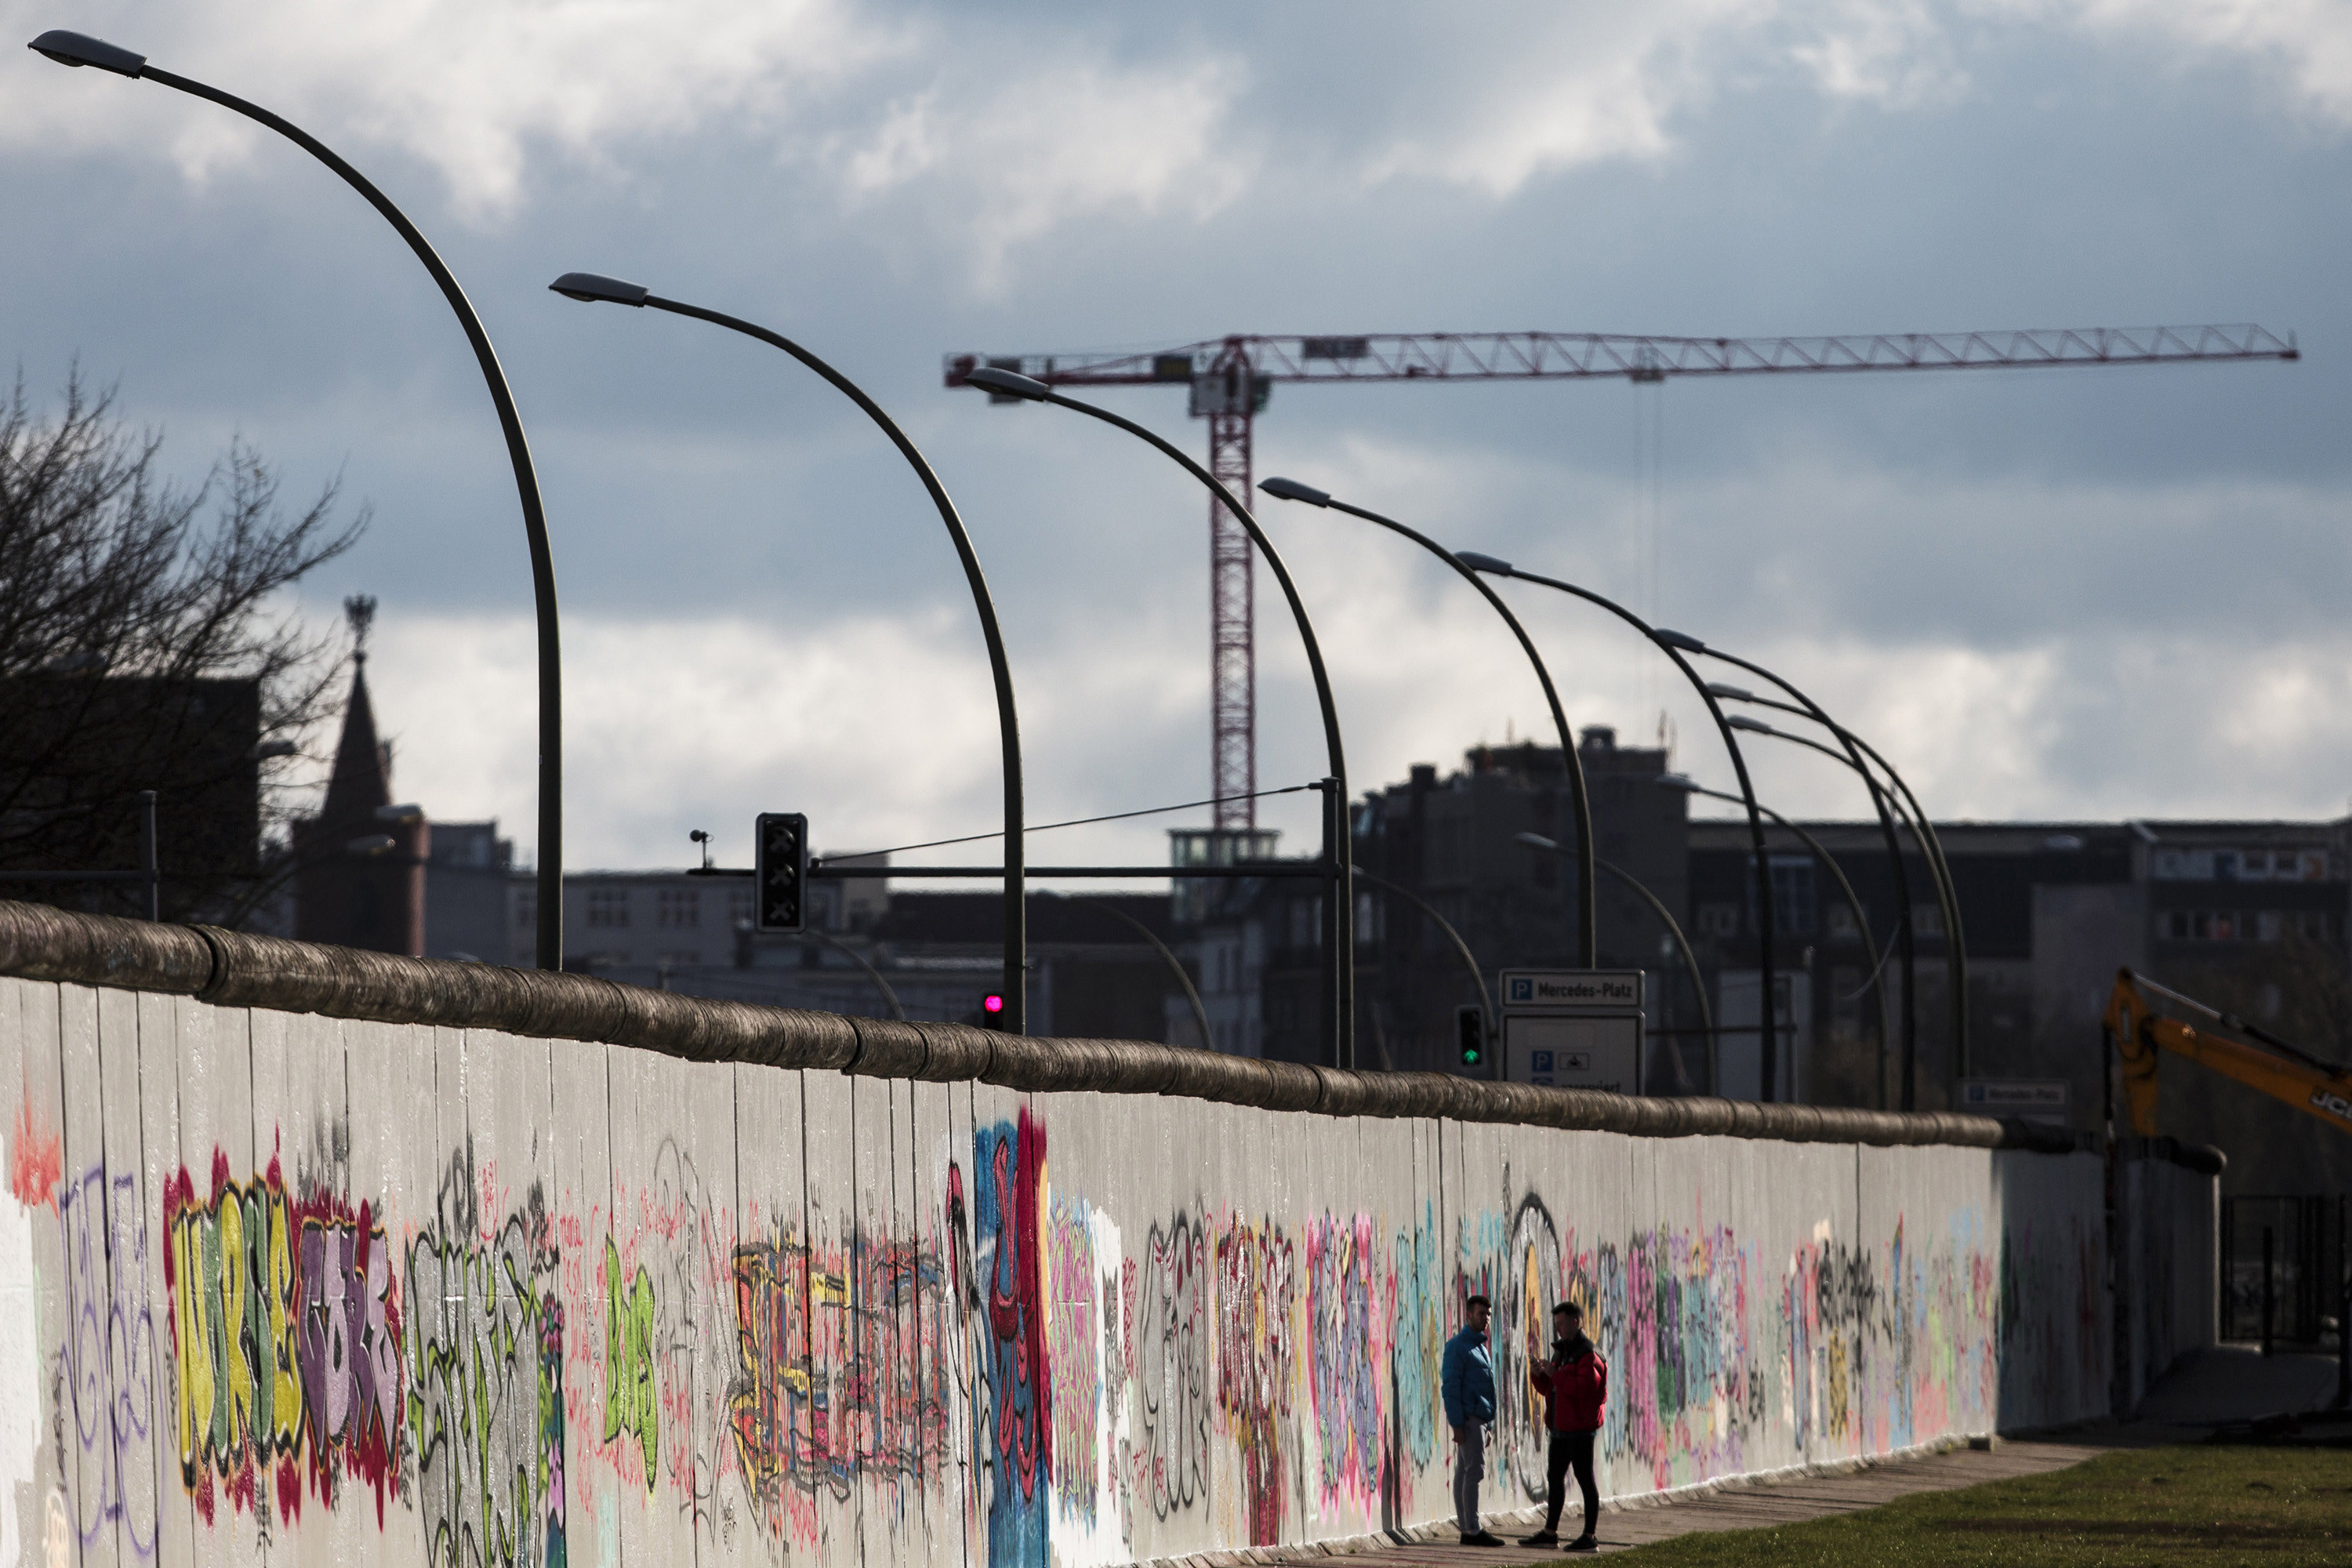 Freedom marks a milestone since the downfall of the Berlin Wall